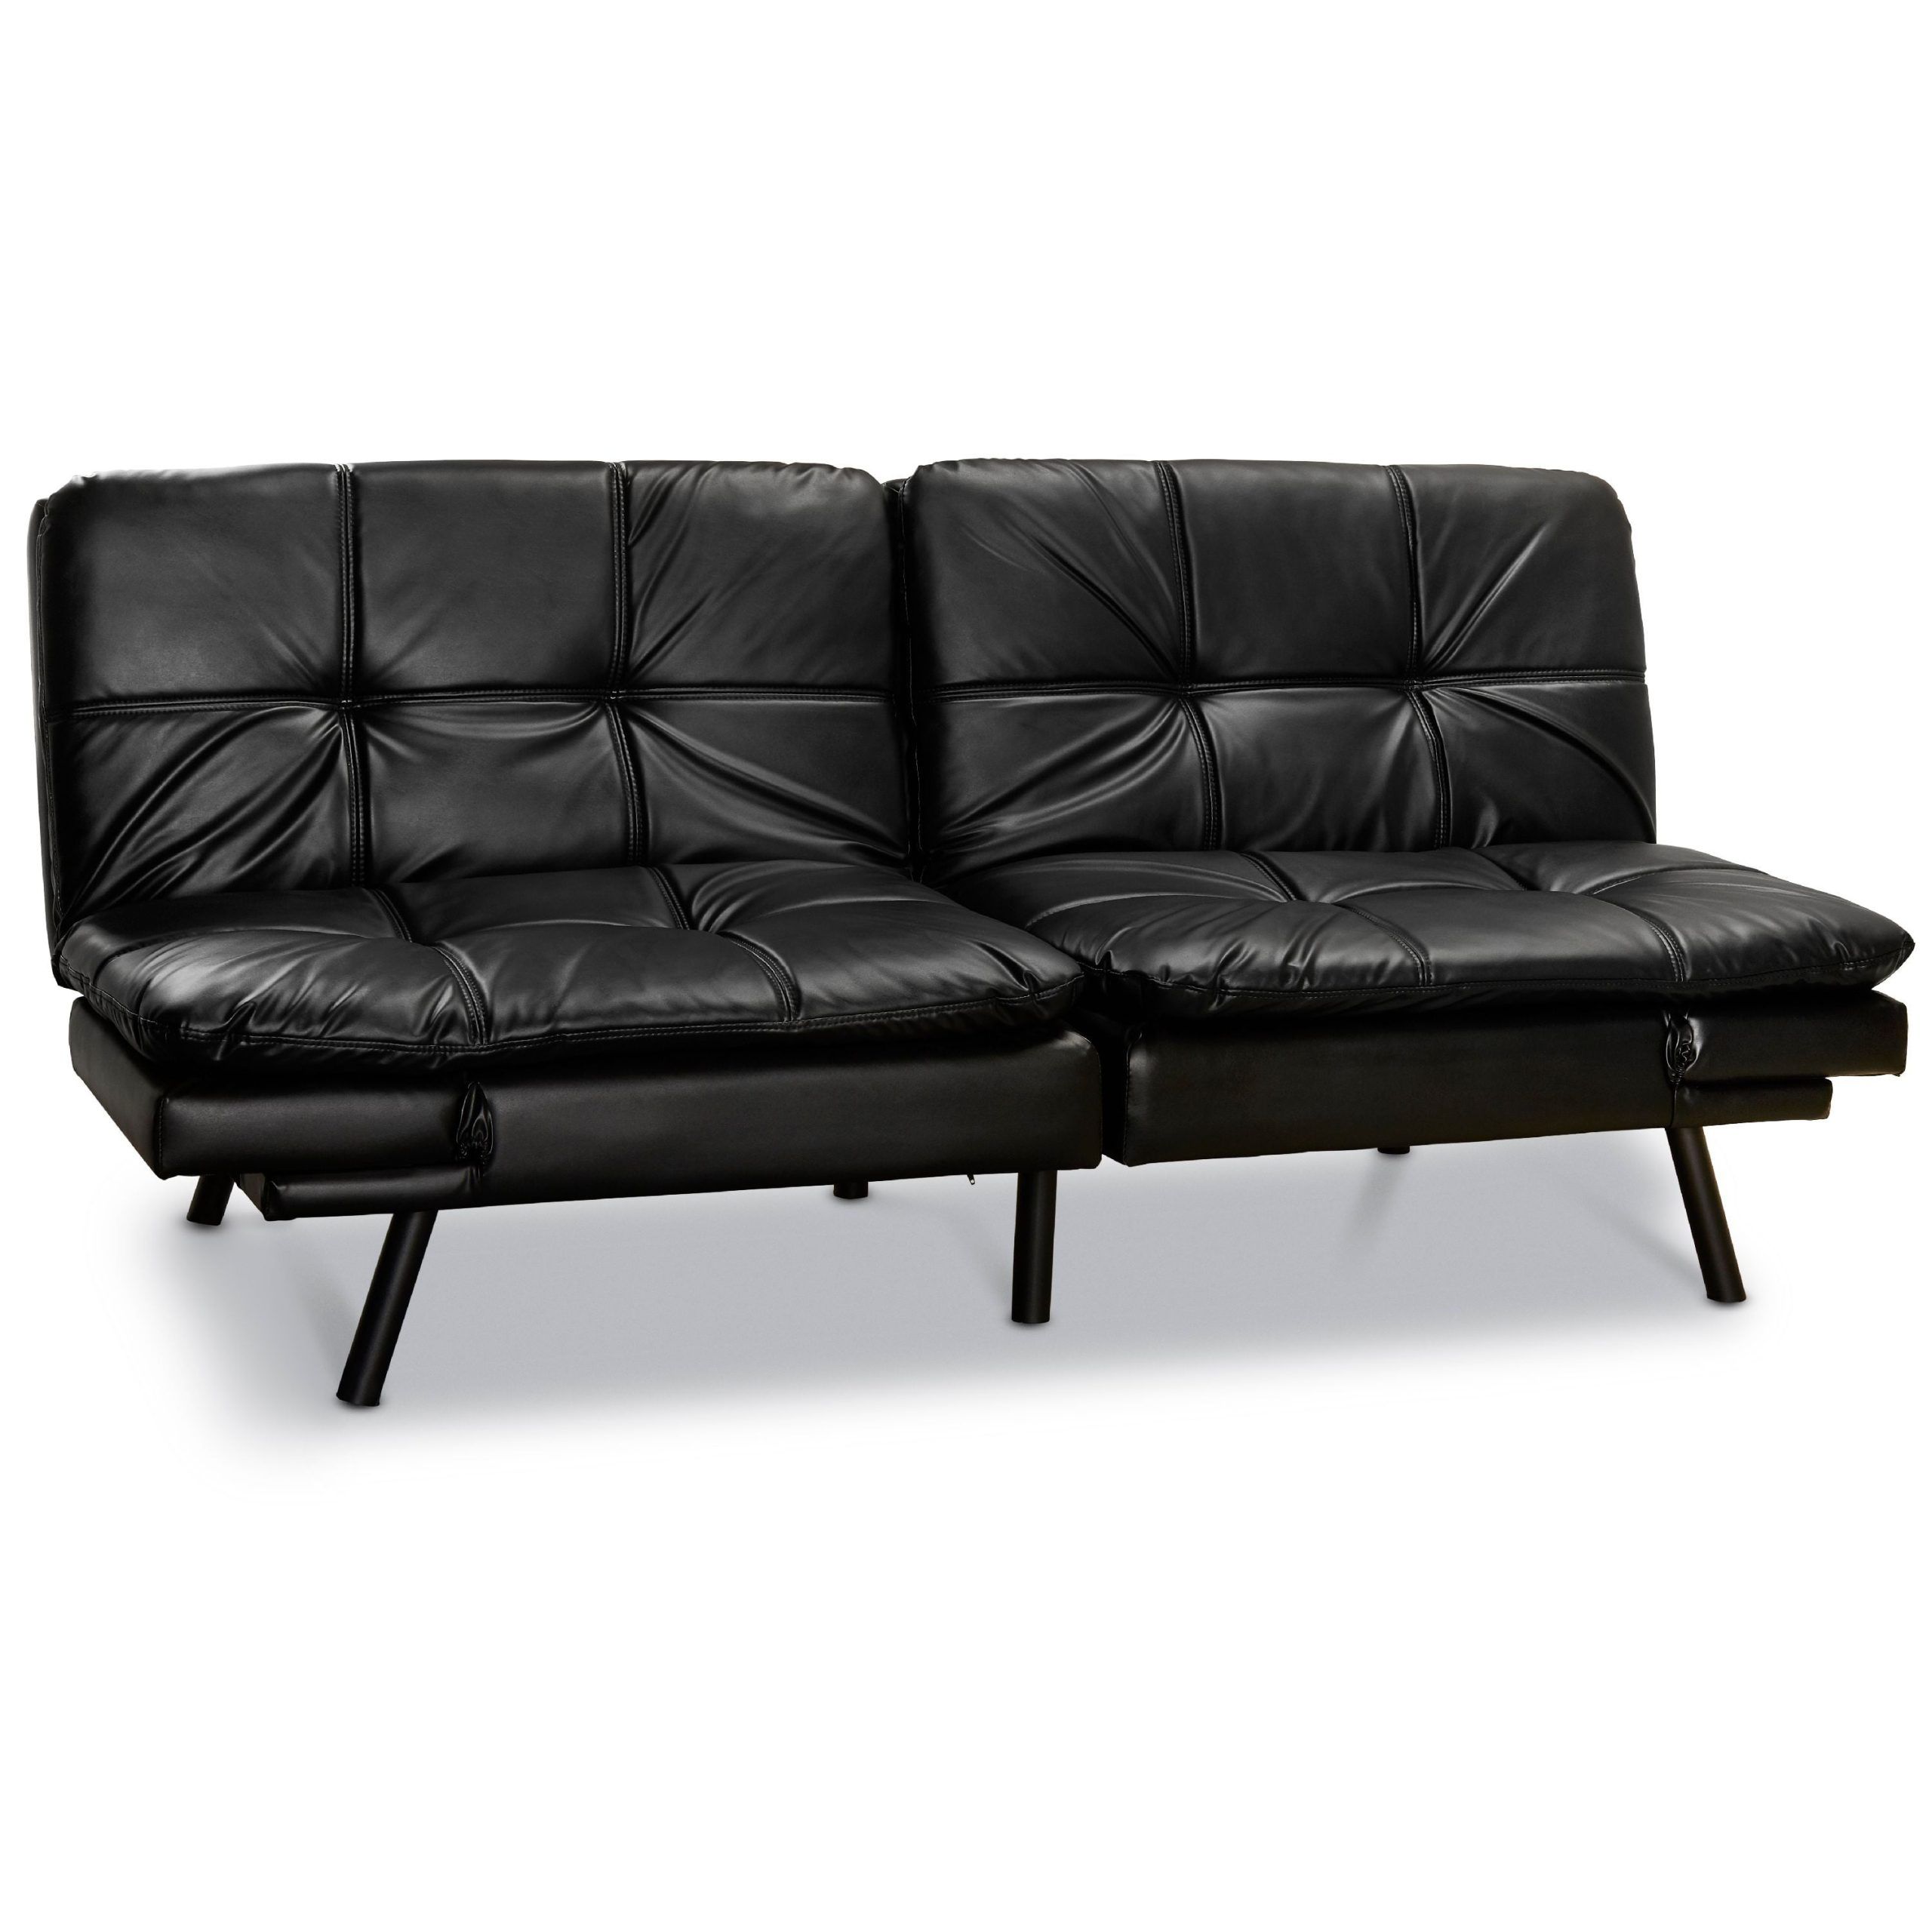 Black Faux Suede Memory Foam Sofas With Latest Mainstays Memory Foam Futon, Black Faux Leather – Walmart – Walmart (View 7 of 15)